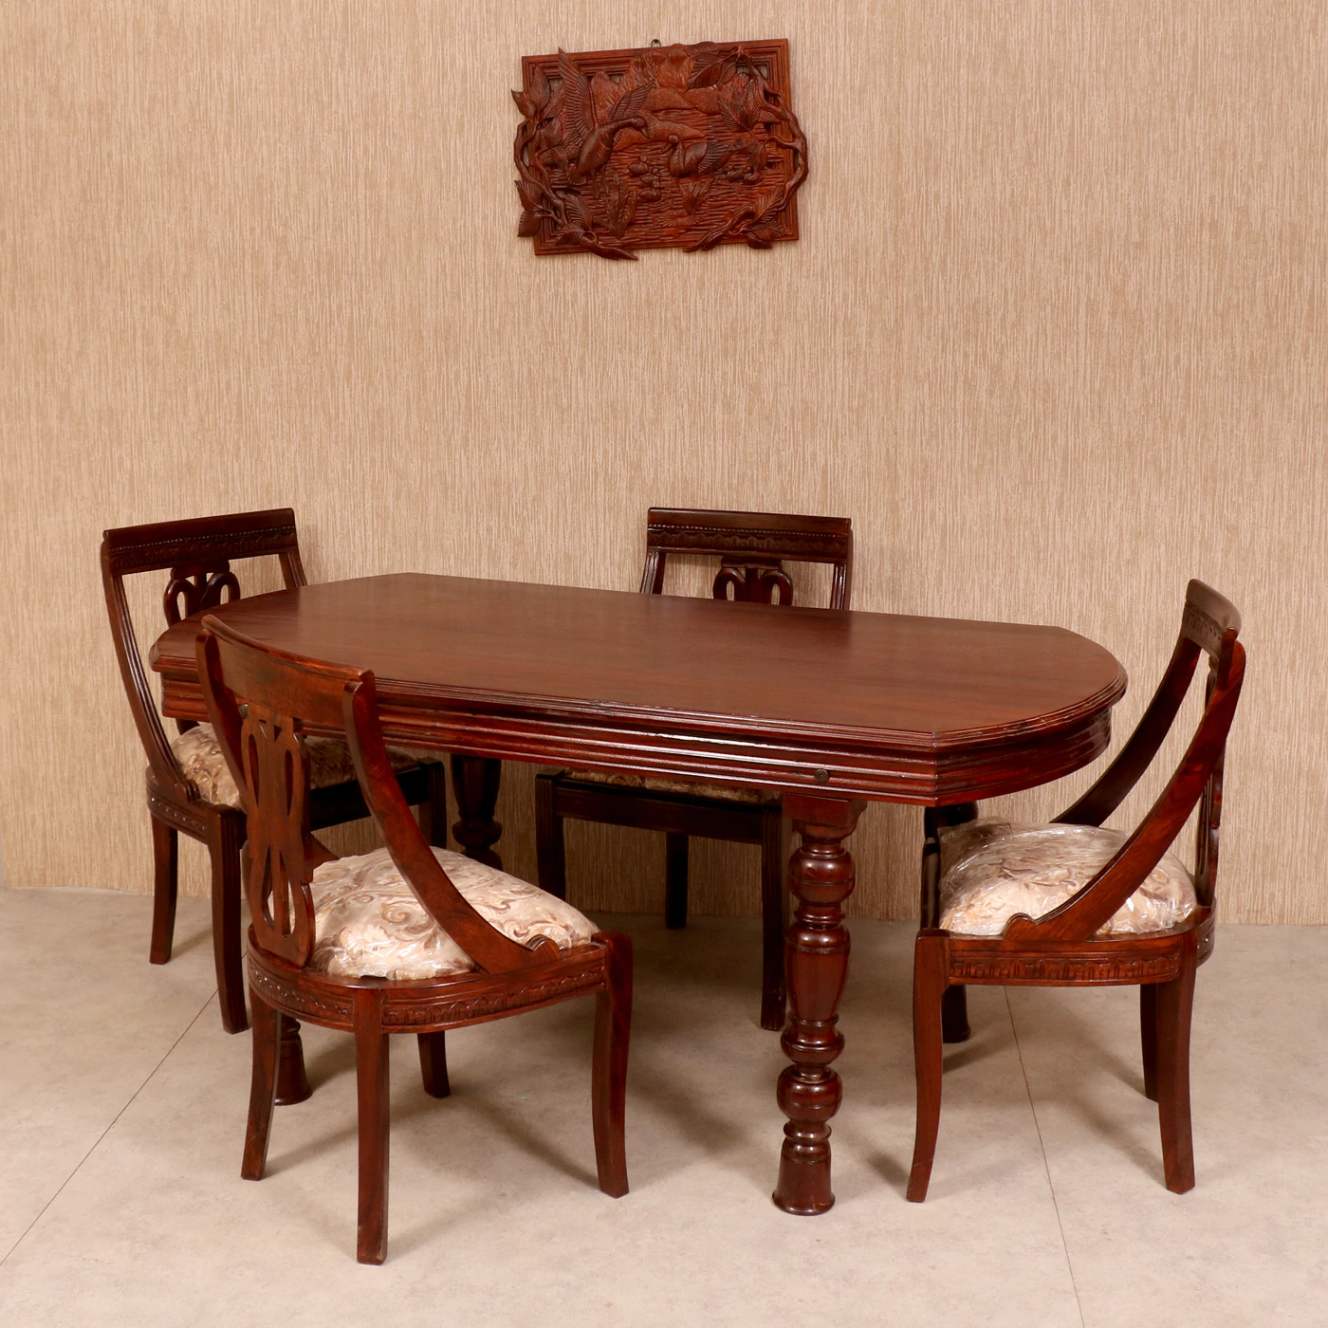 Wooden Dining Table Design